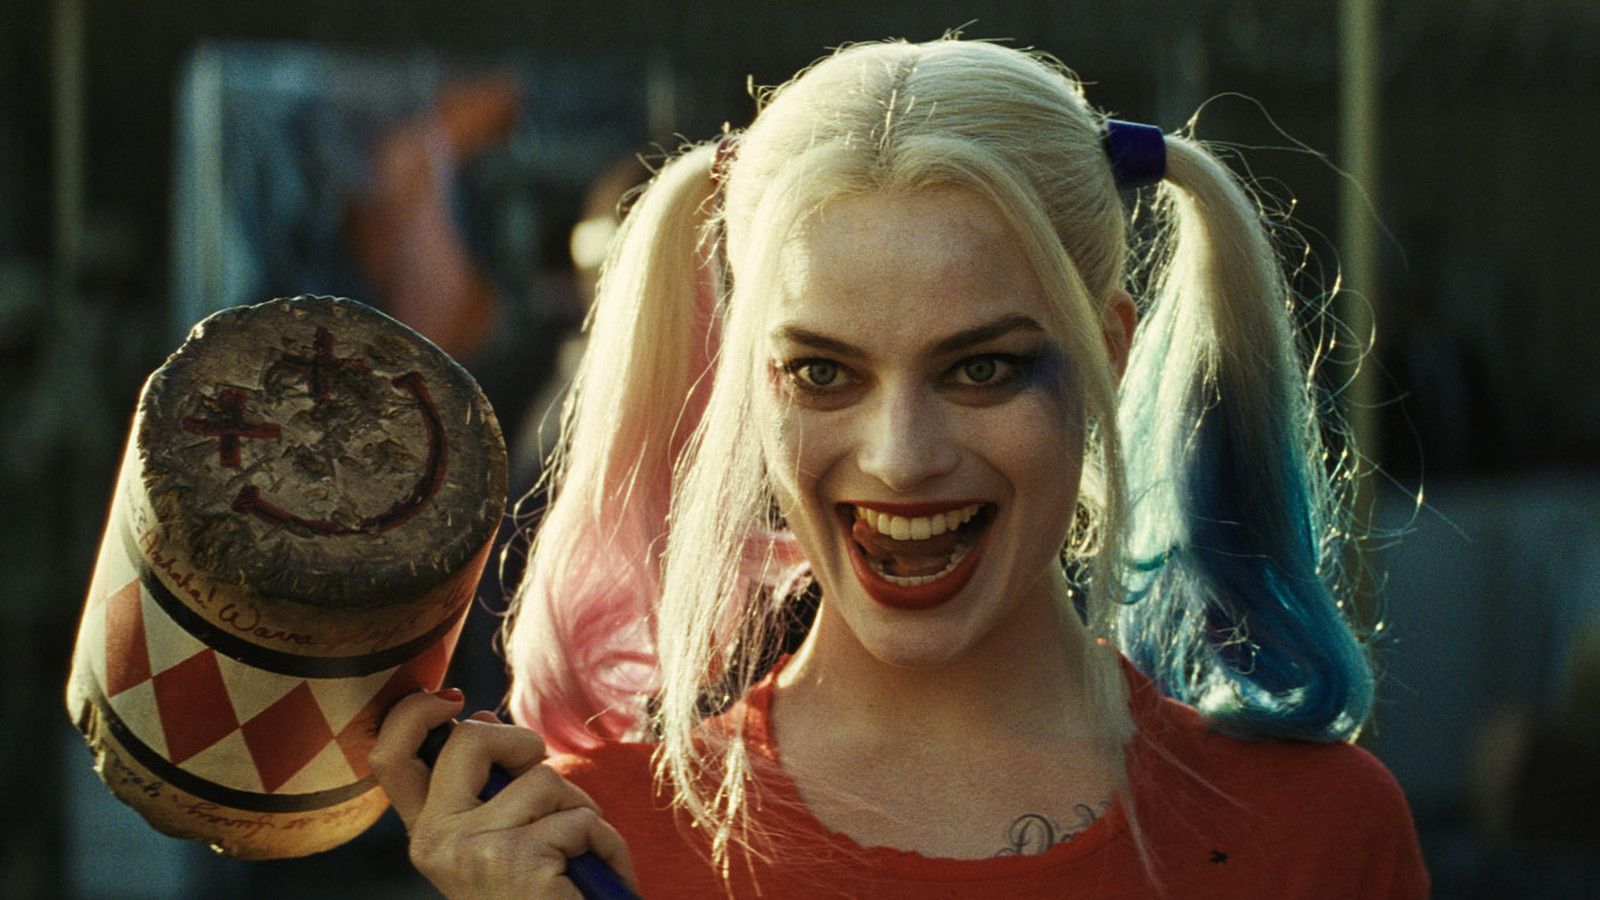 Get to know the faces of the 'Suicide Squad'